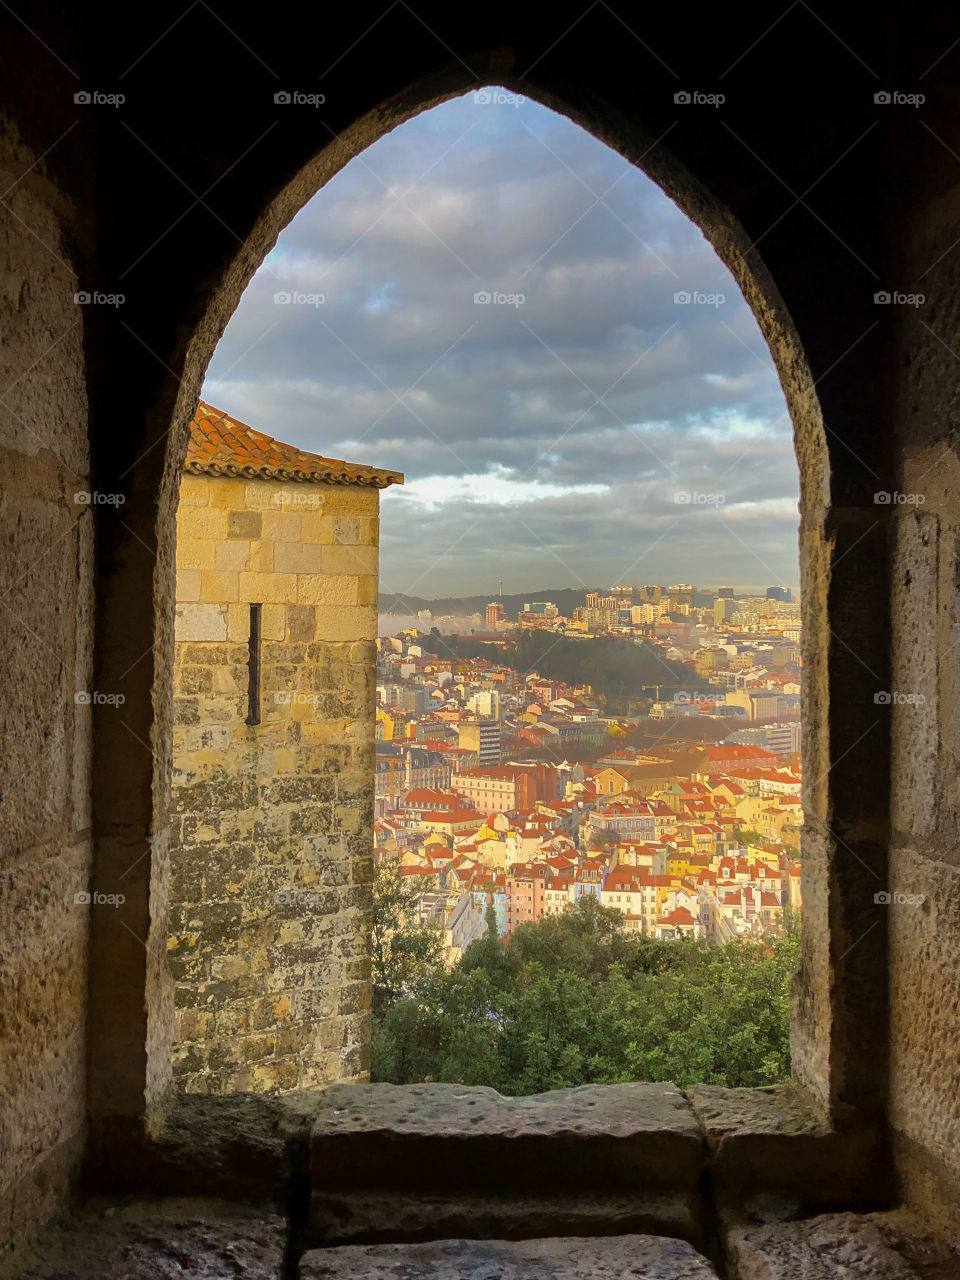 Looking out across the city of Lisbon as seen from within an old castle tower window